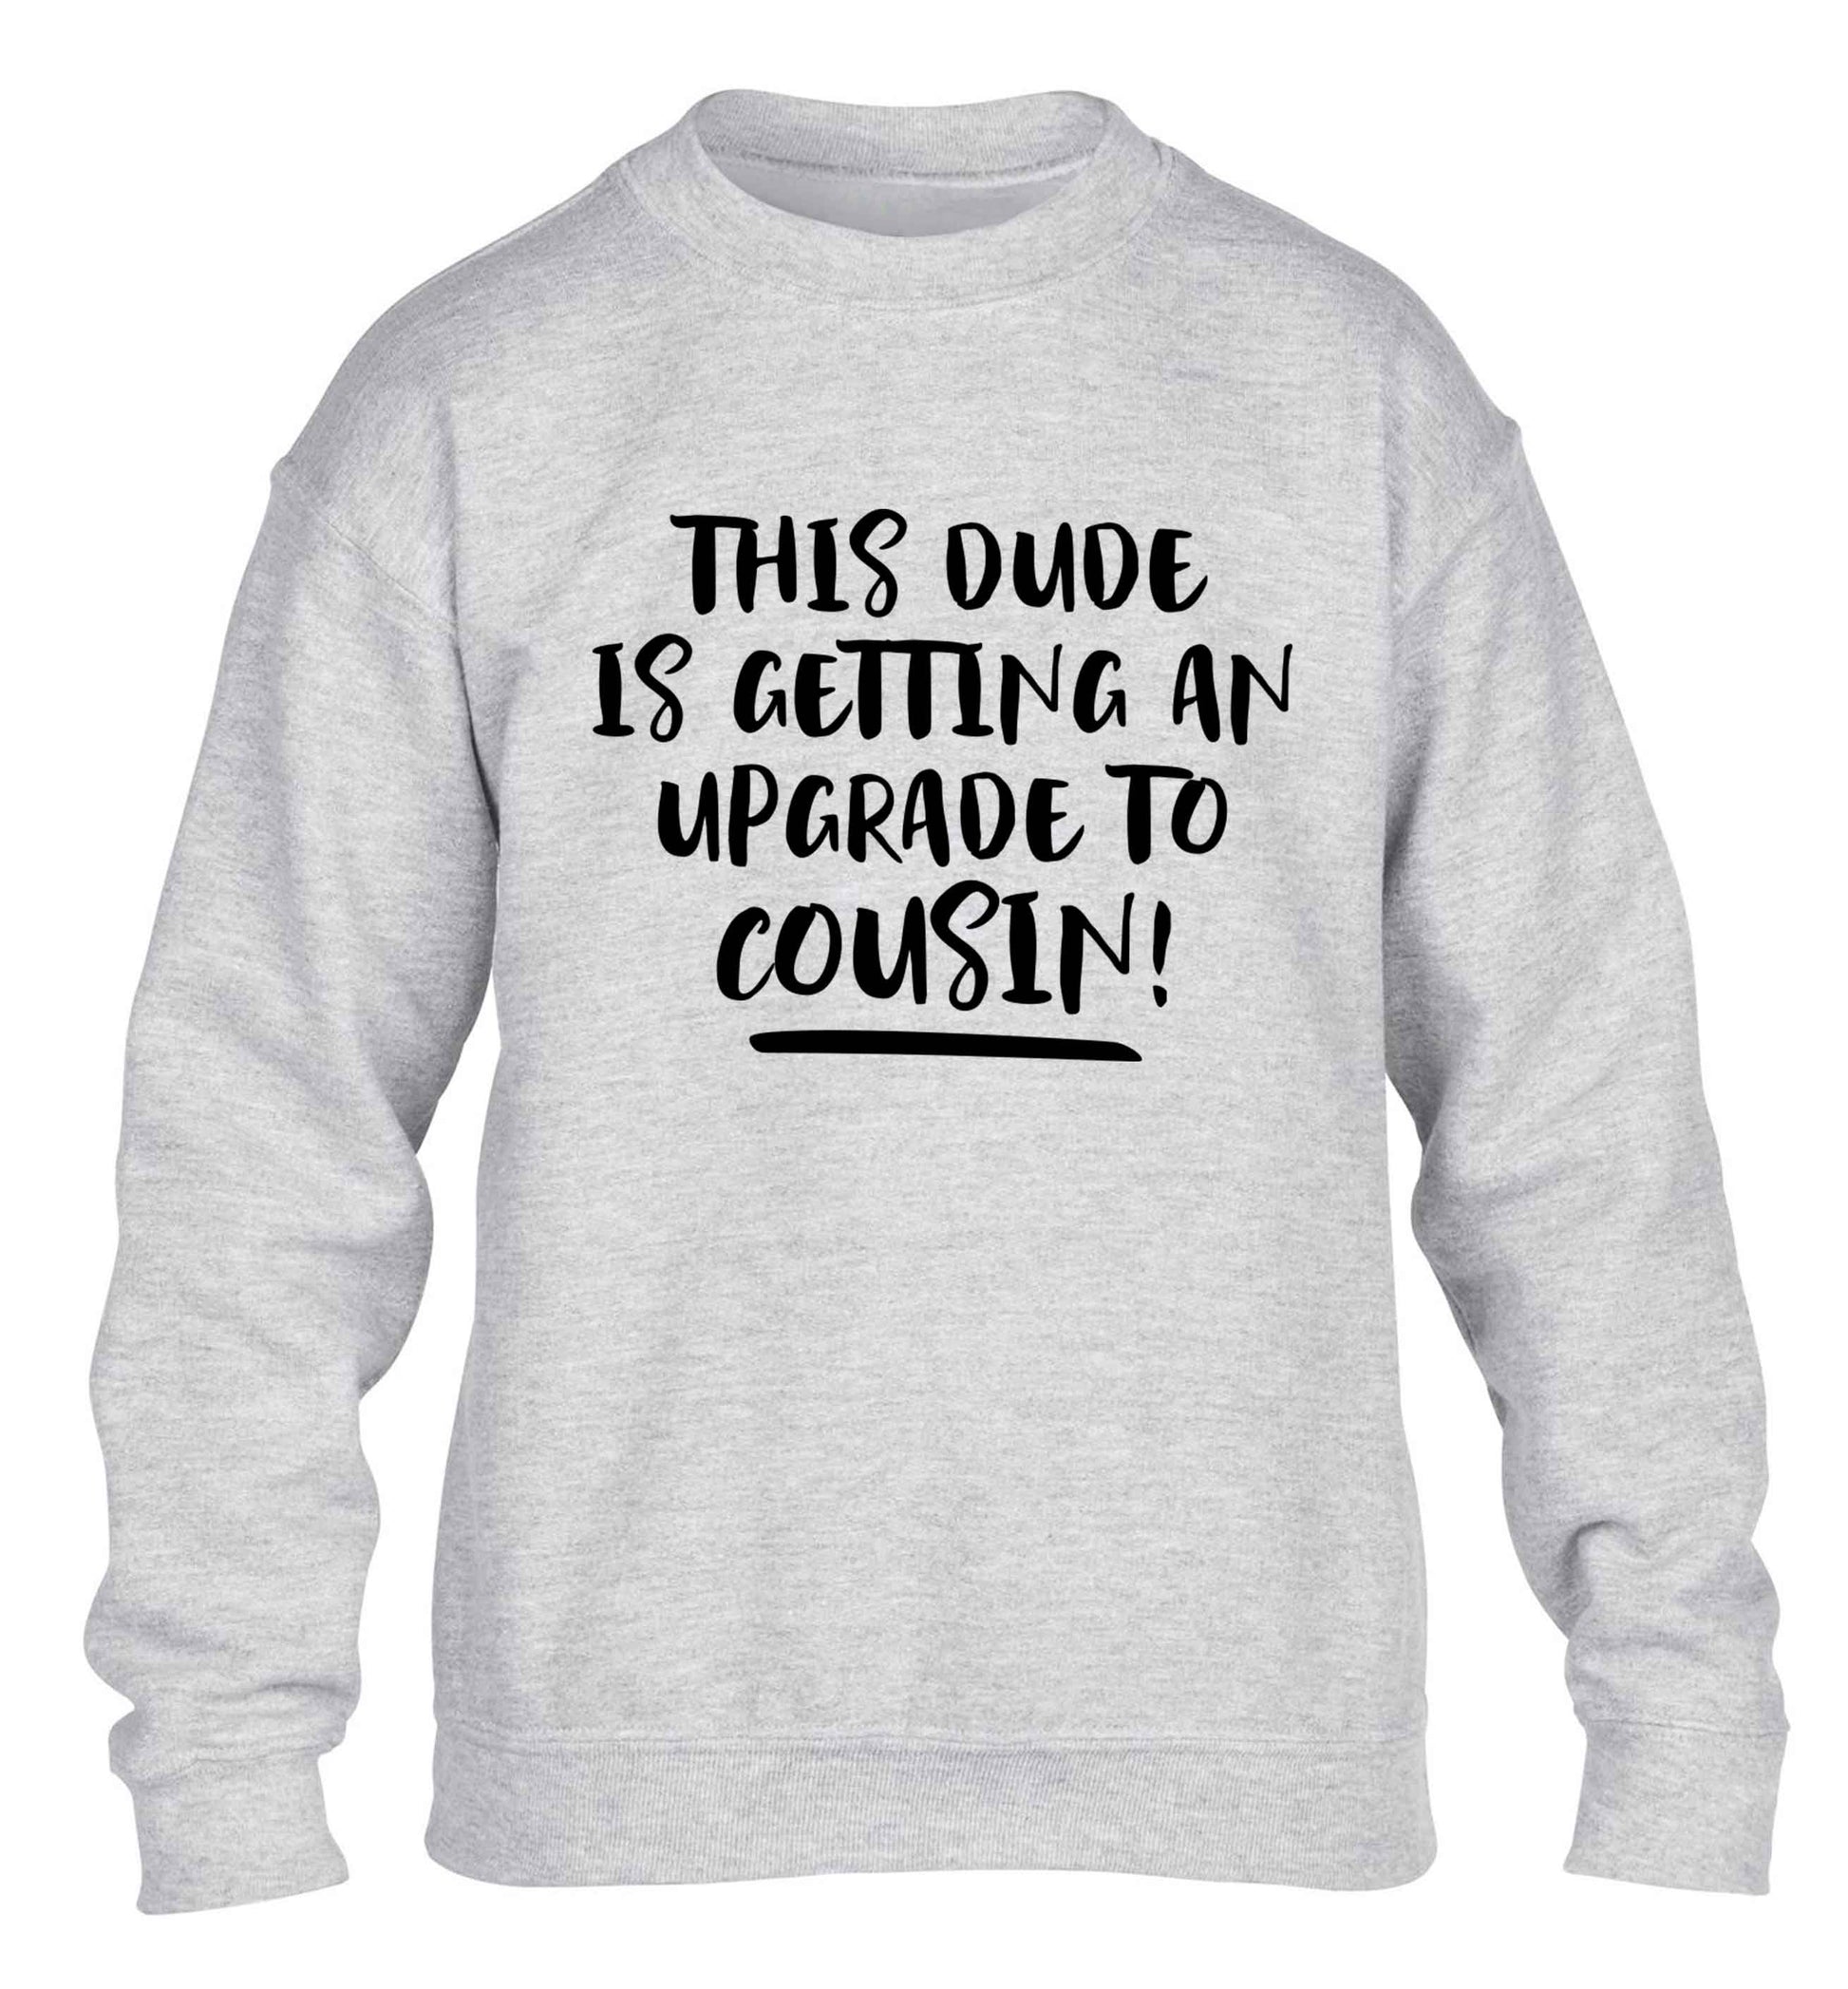 This dude is getting an upgrade to cousin! children's grey sweater 12-13 Years